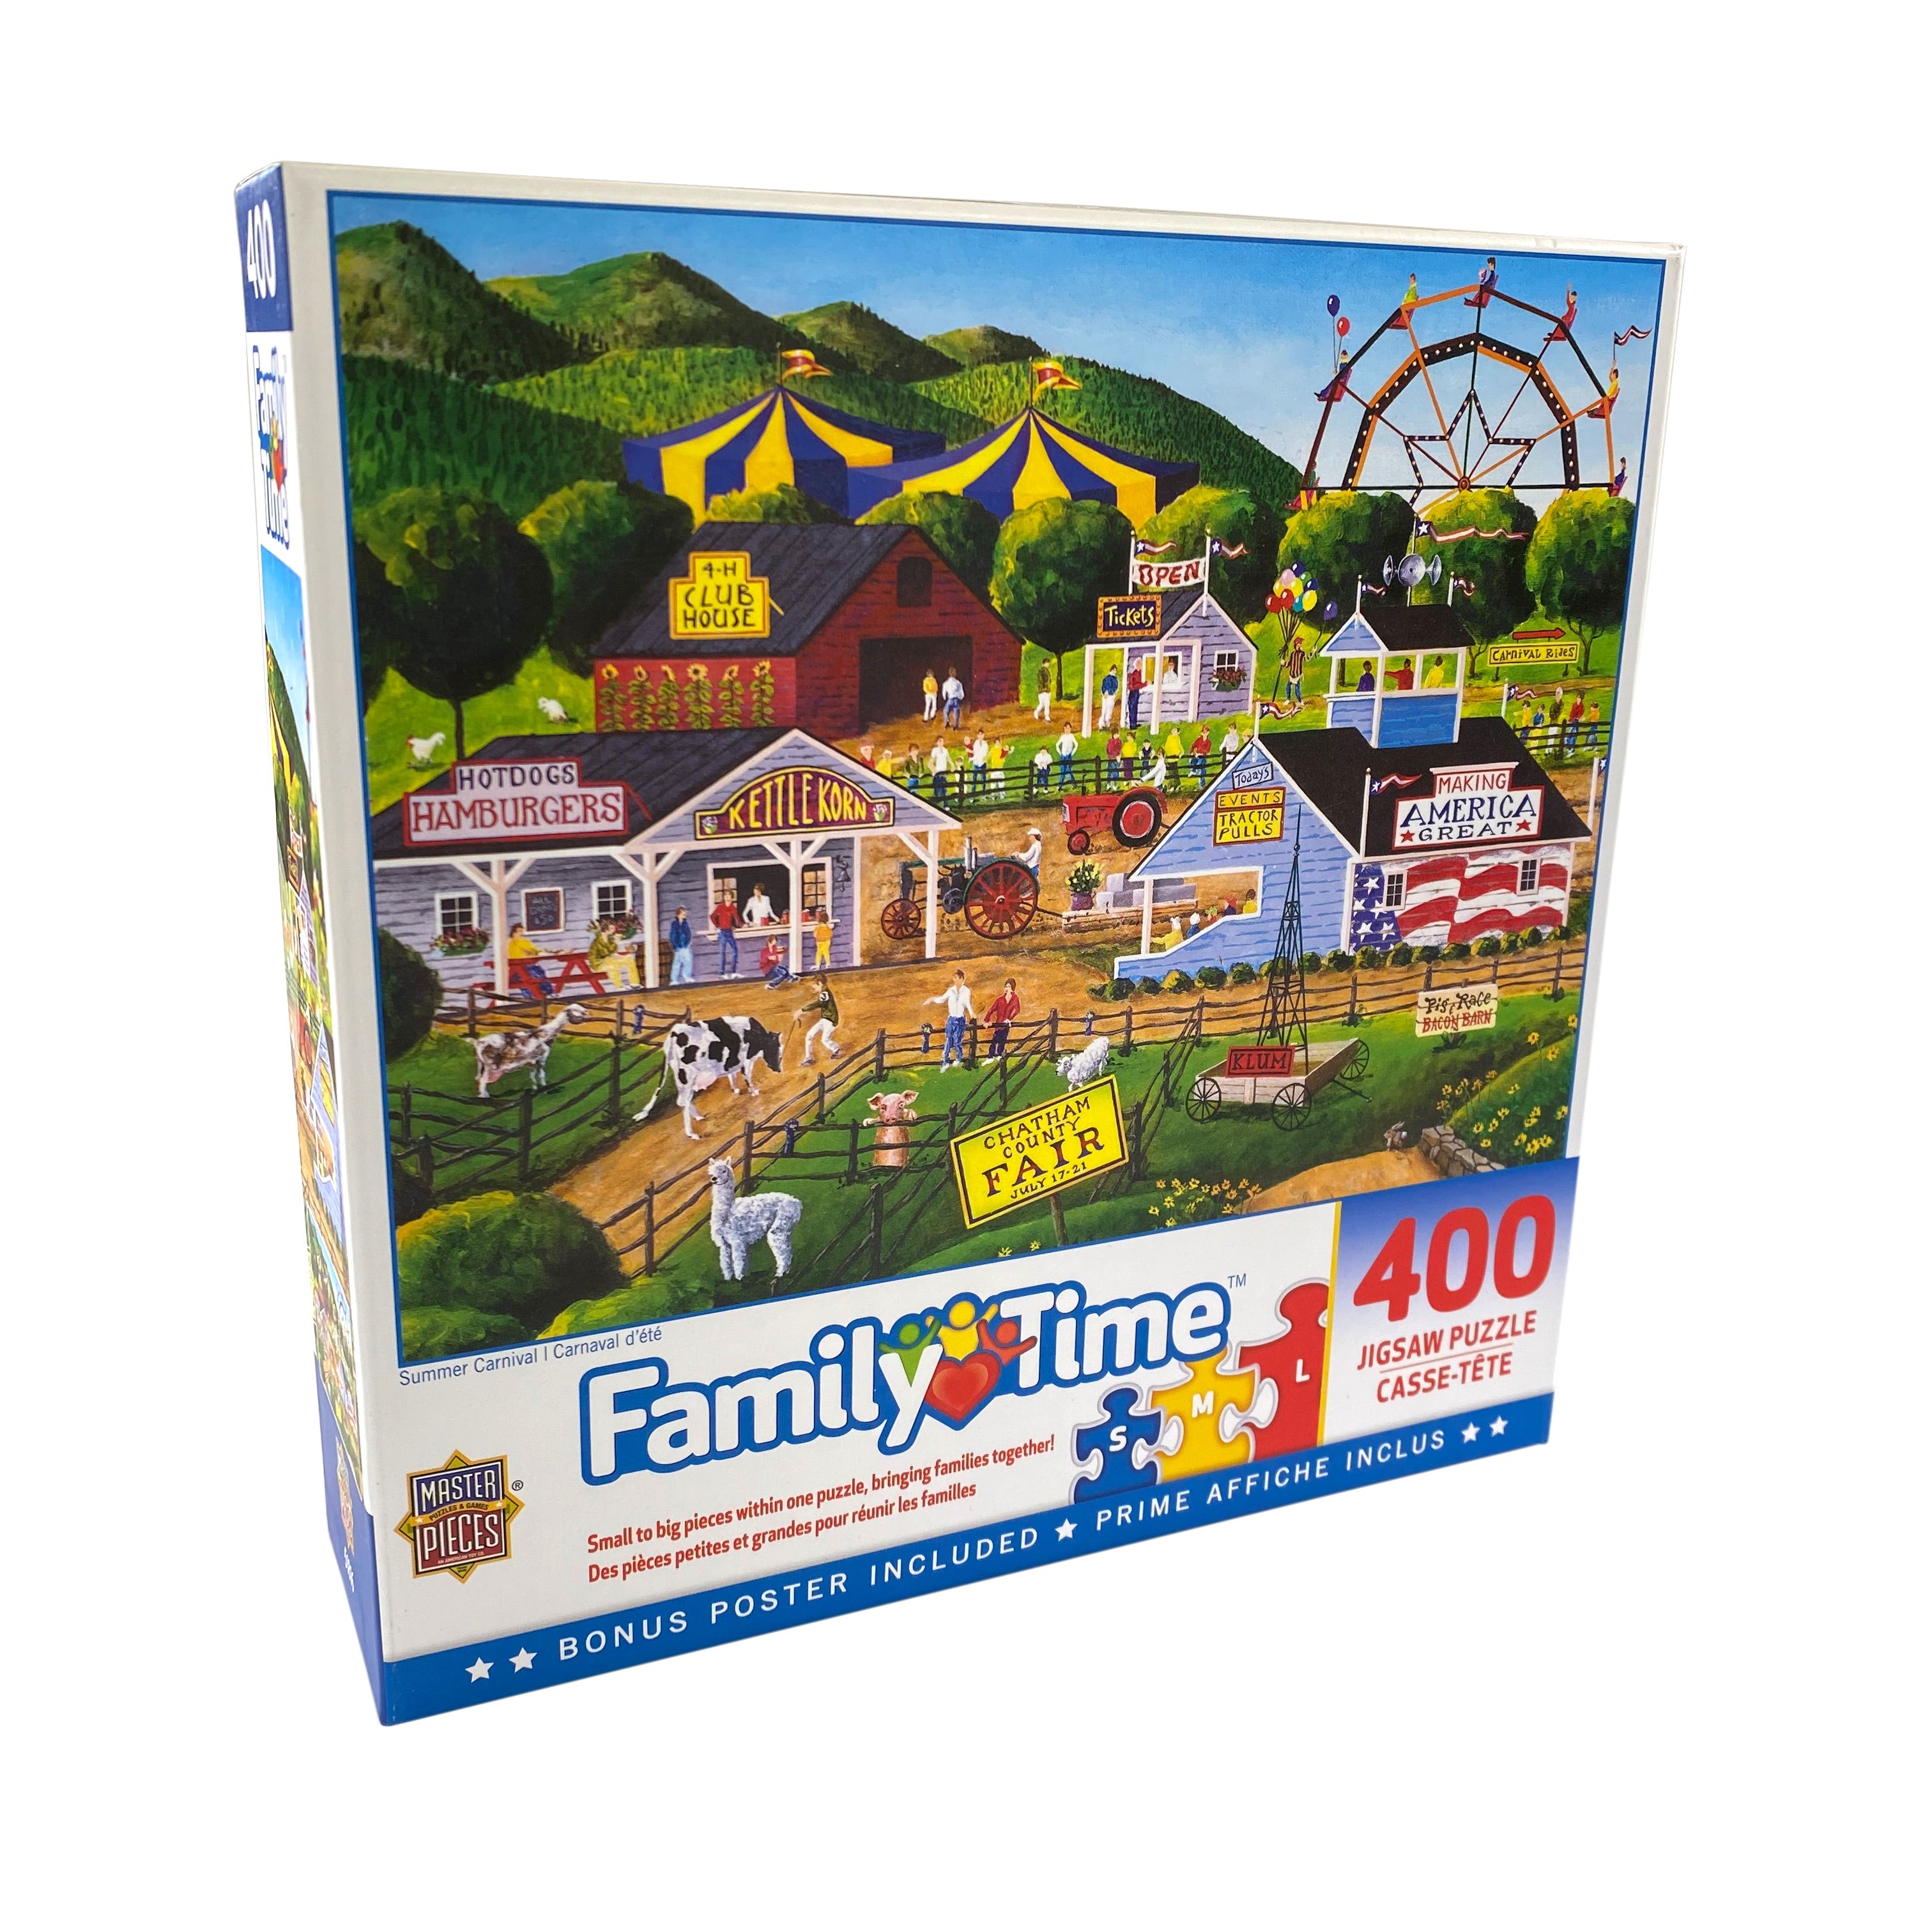 Summer Carnival 400 Piece Family Time Puzzle    